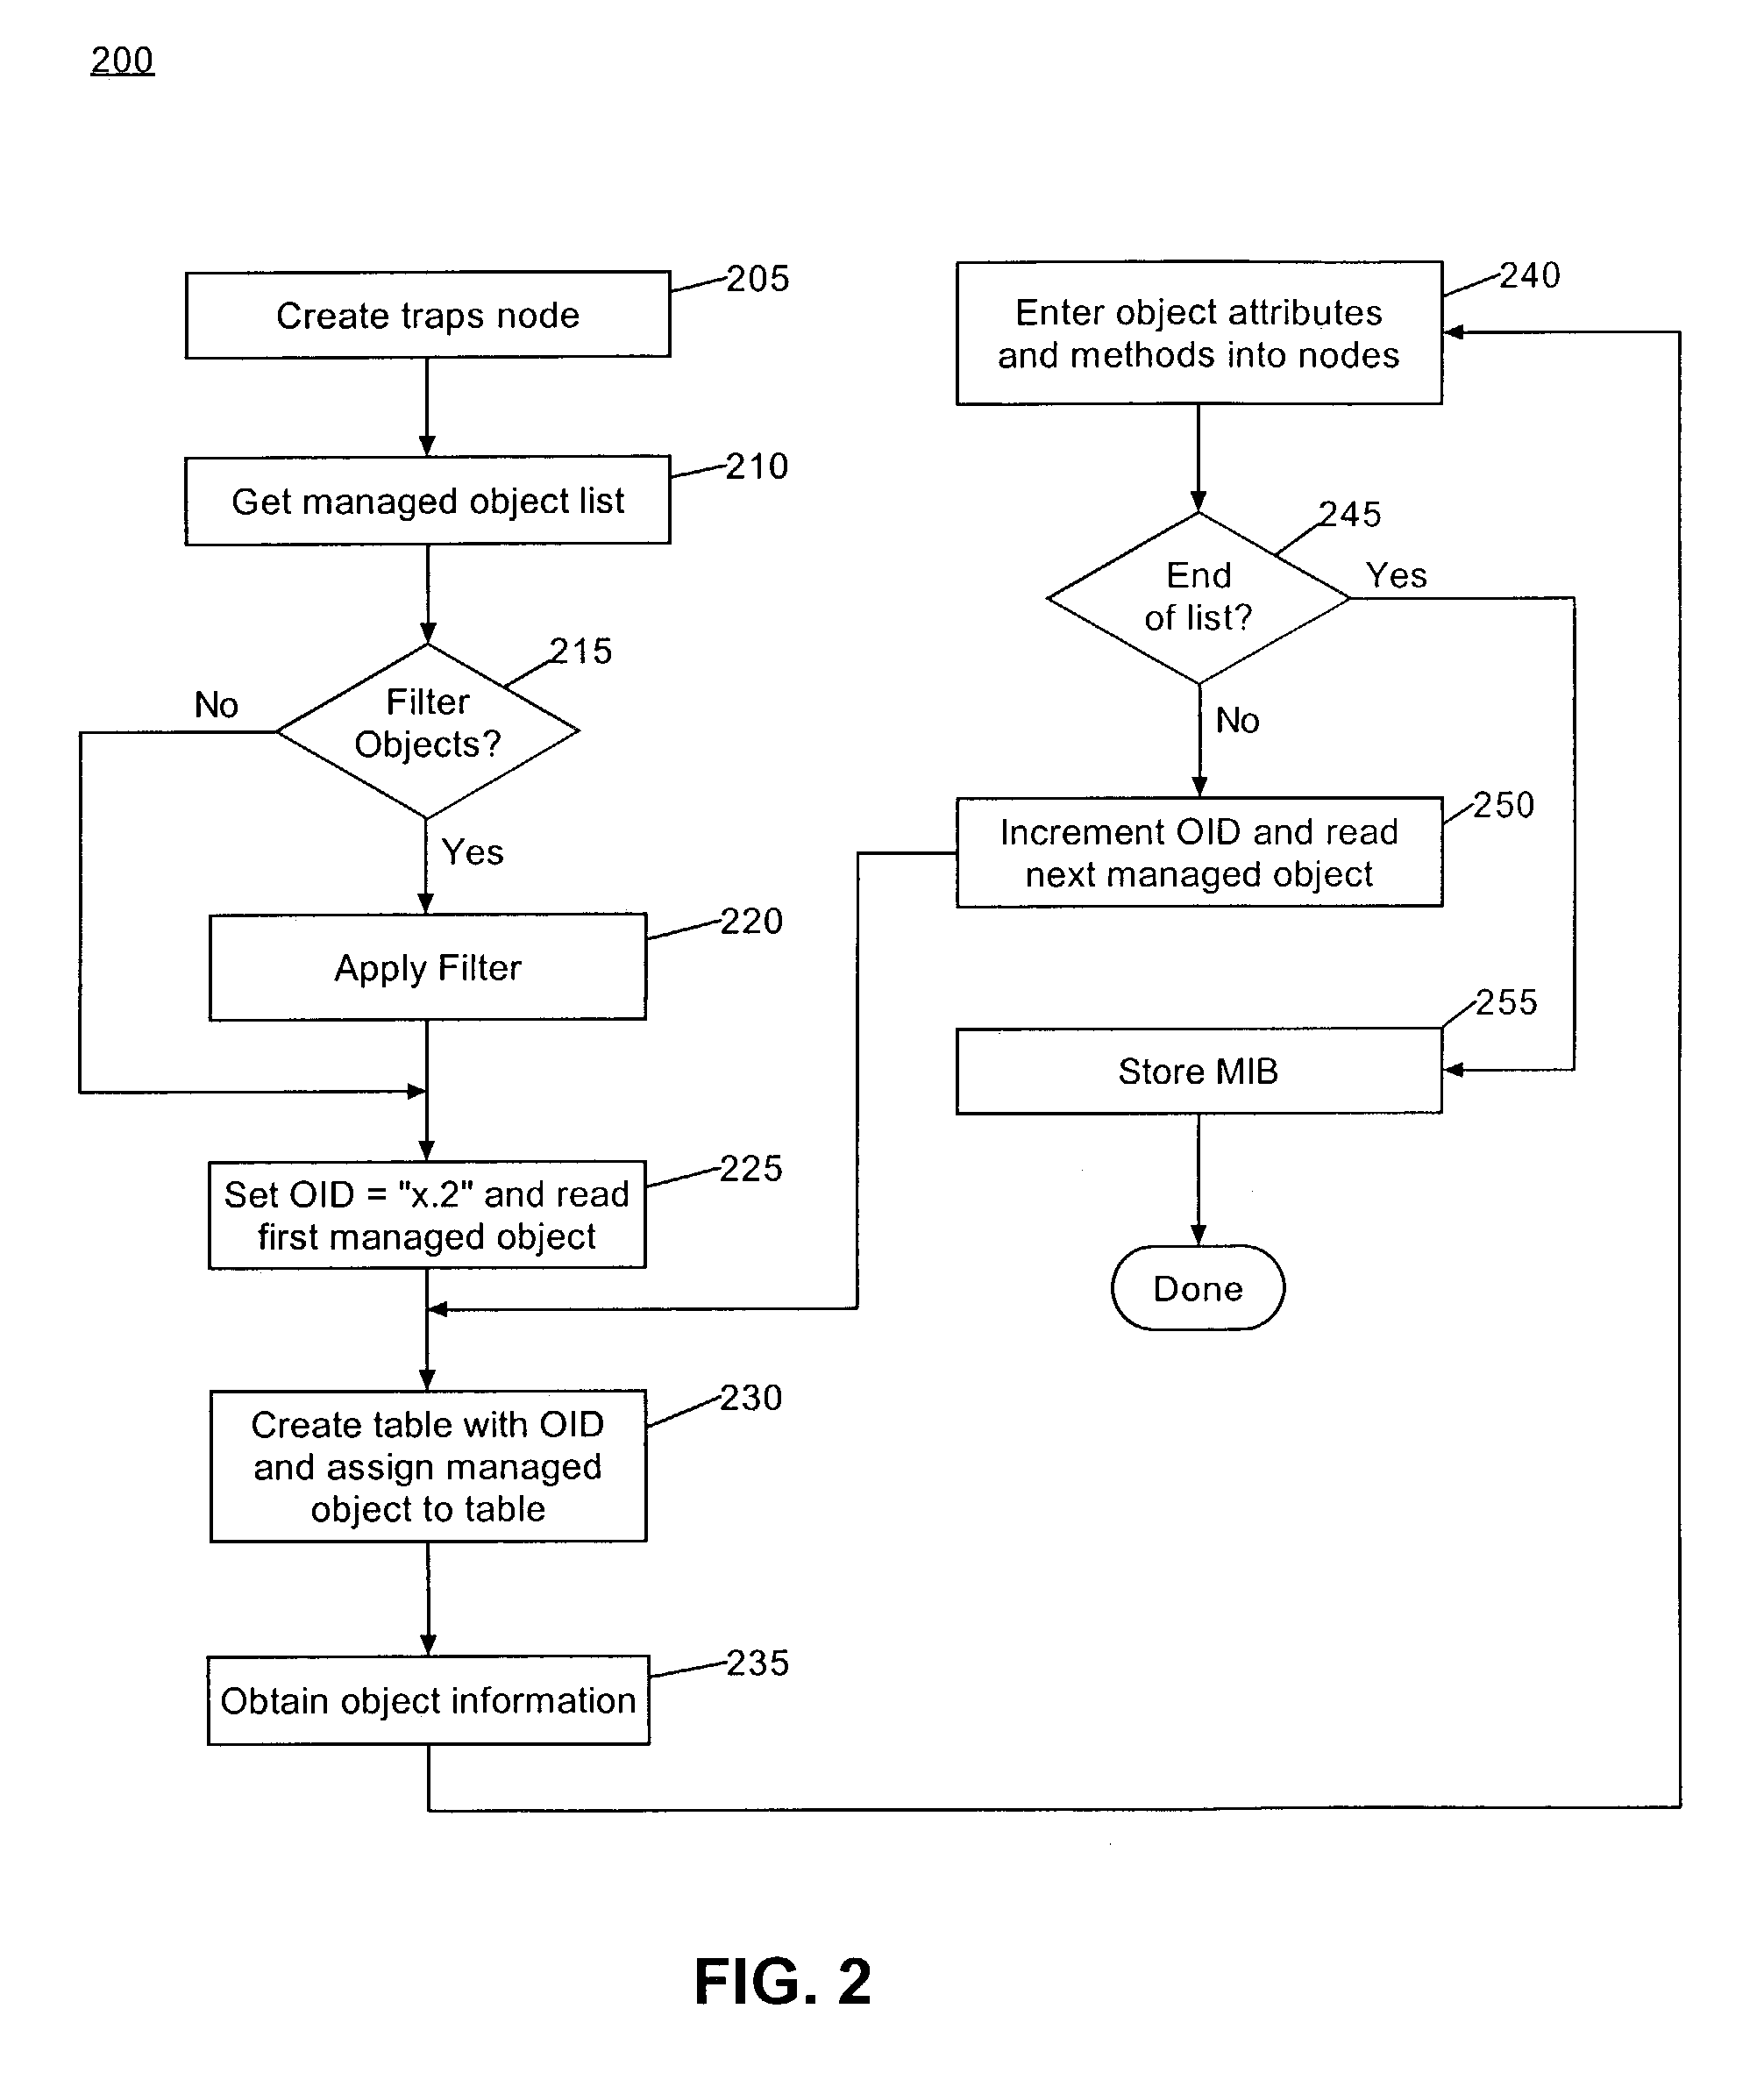 Method of automatically generating an SNMP management information base from extension-enabled management agents